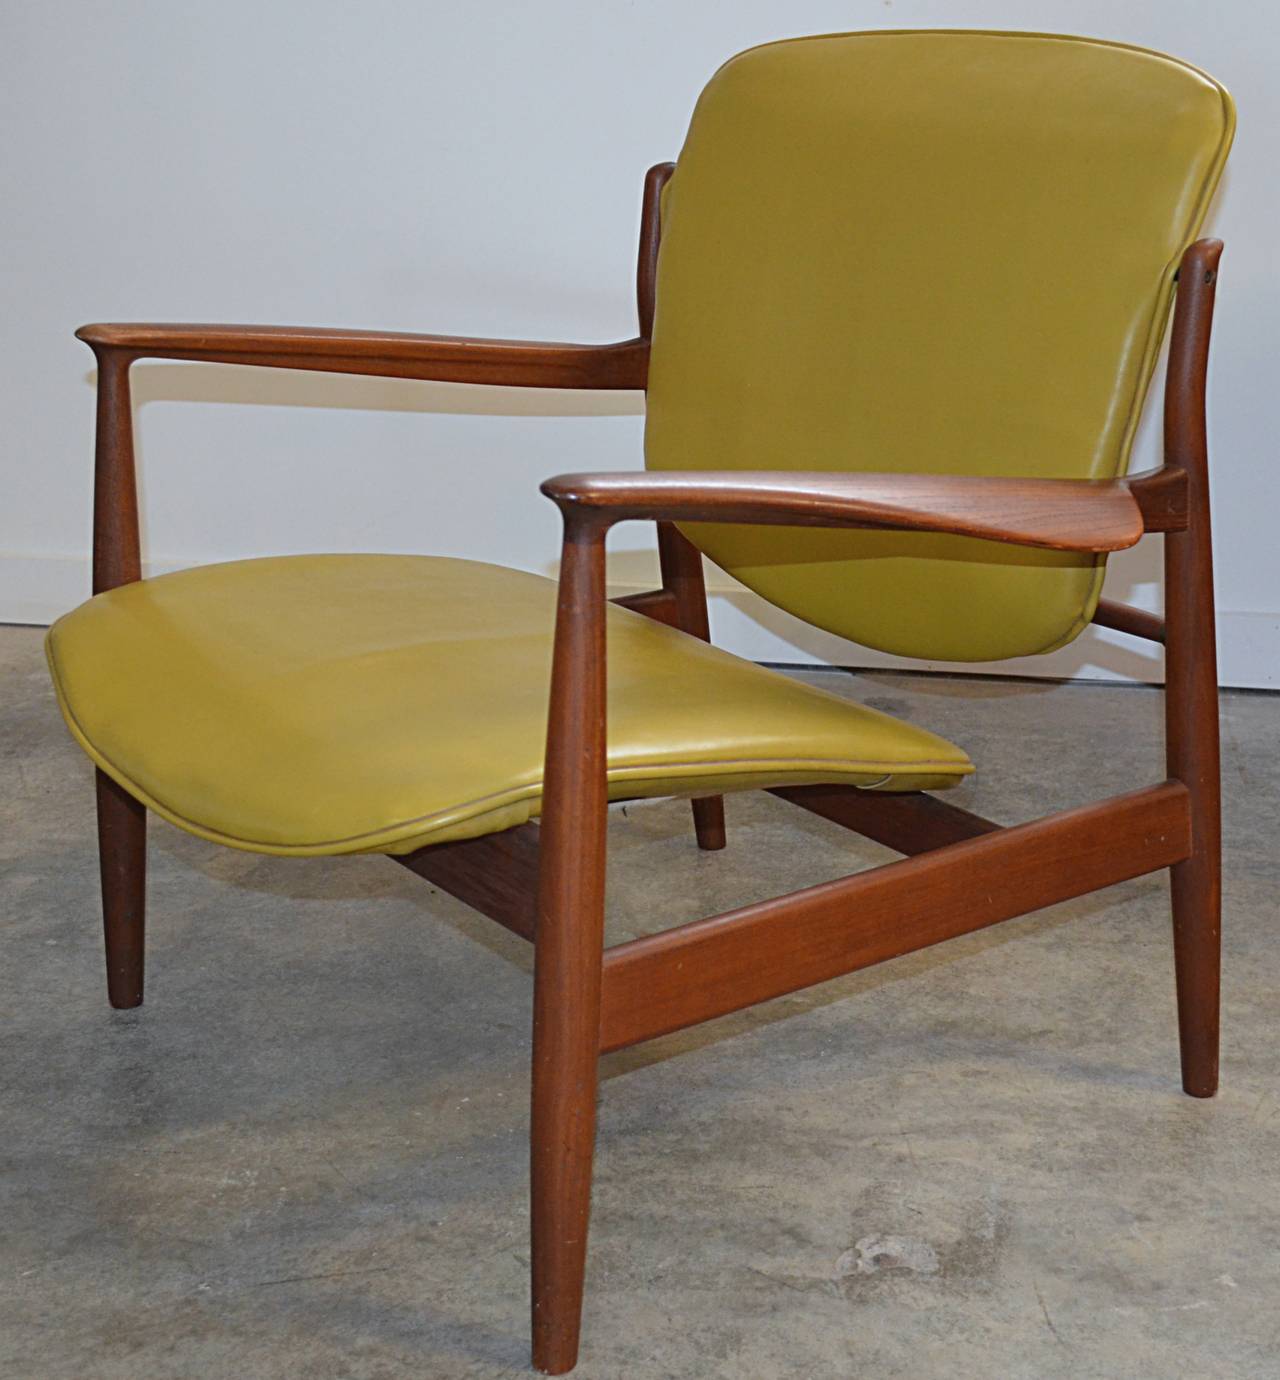 Classic Finn Juhl for France & Sons chair executed in teak. Retains original mustard vinyl covering. inquire about a second chair.